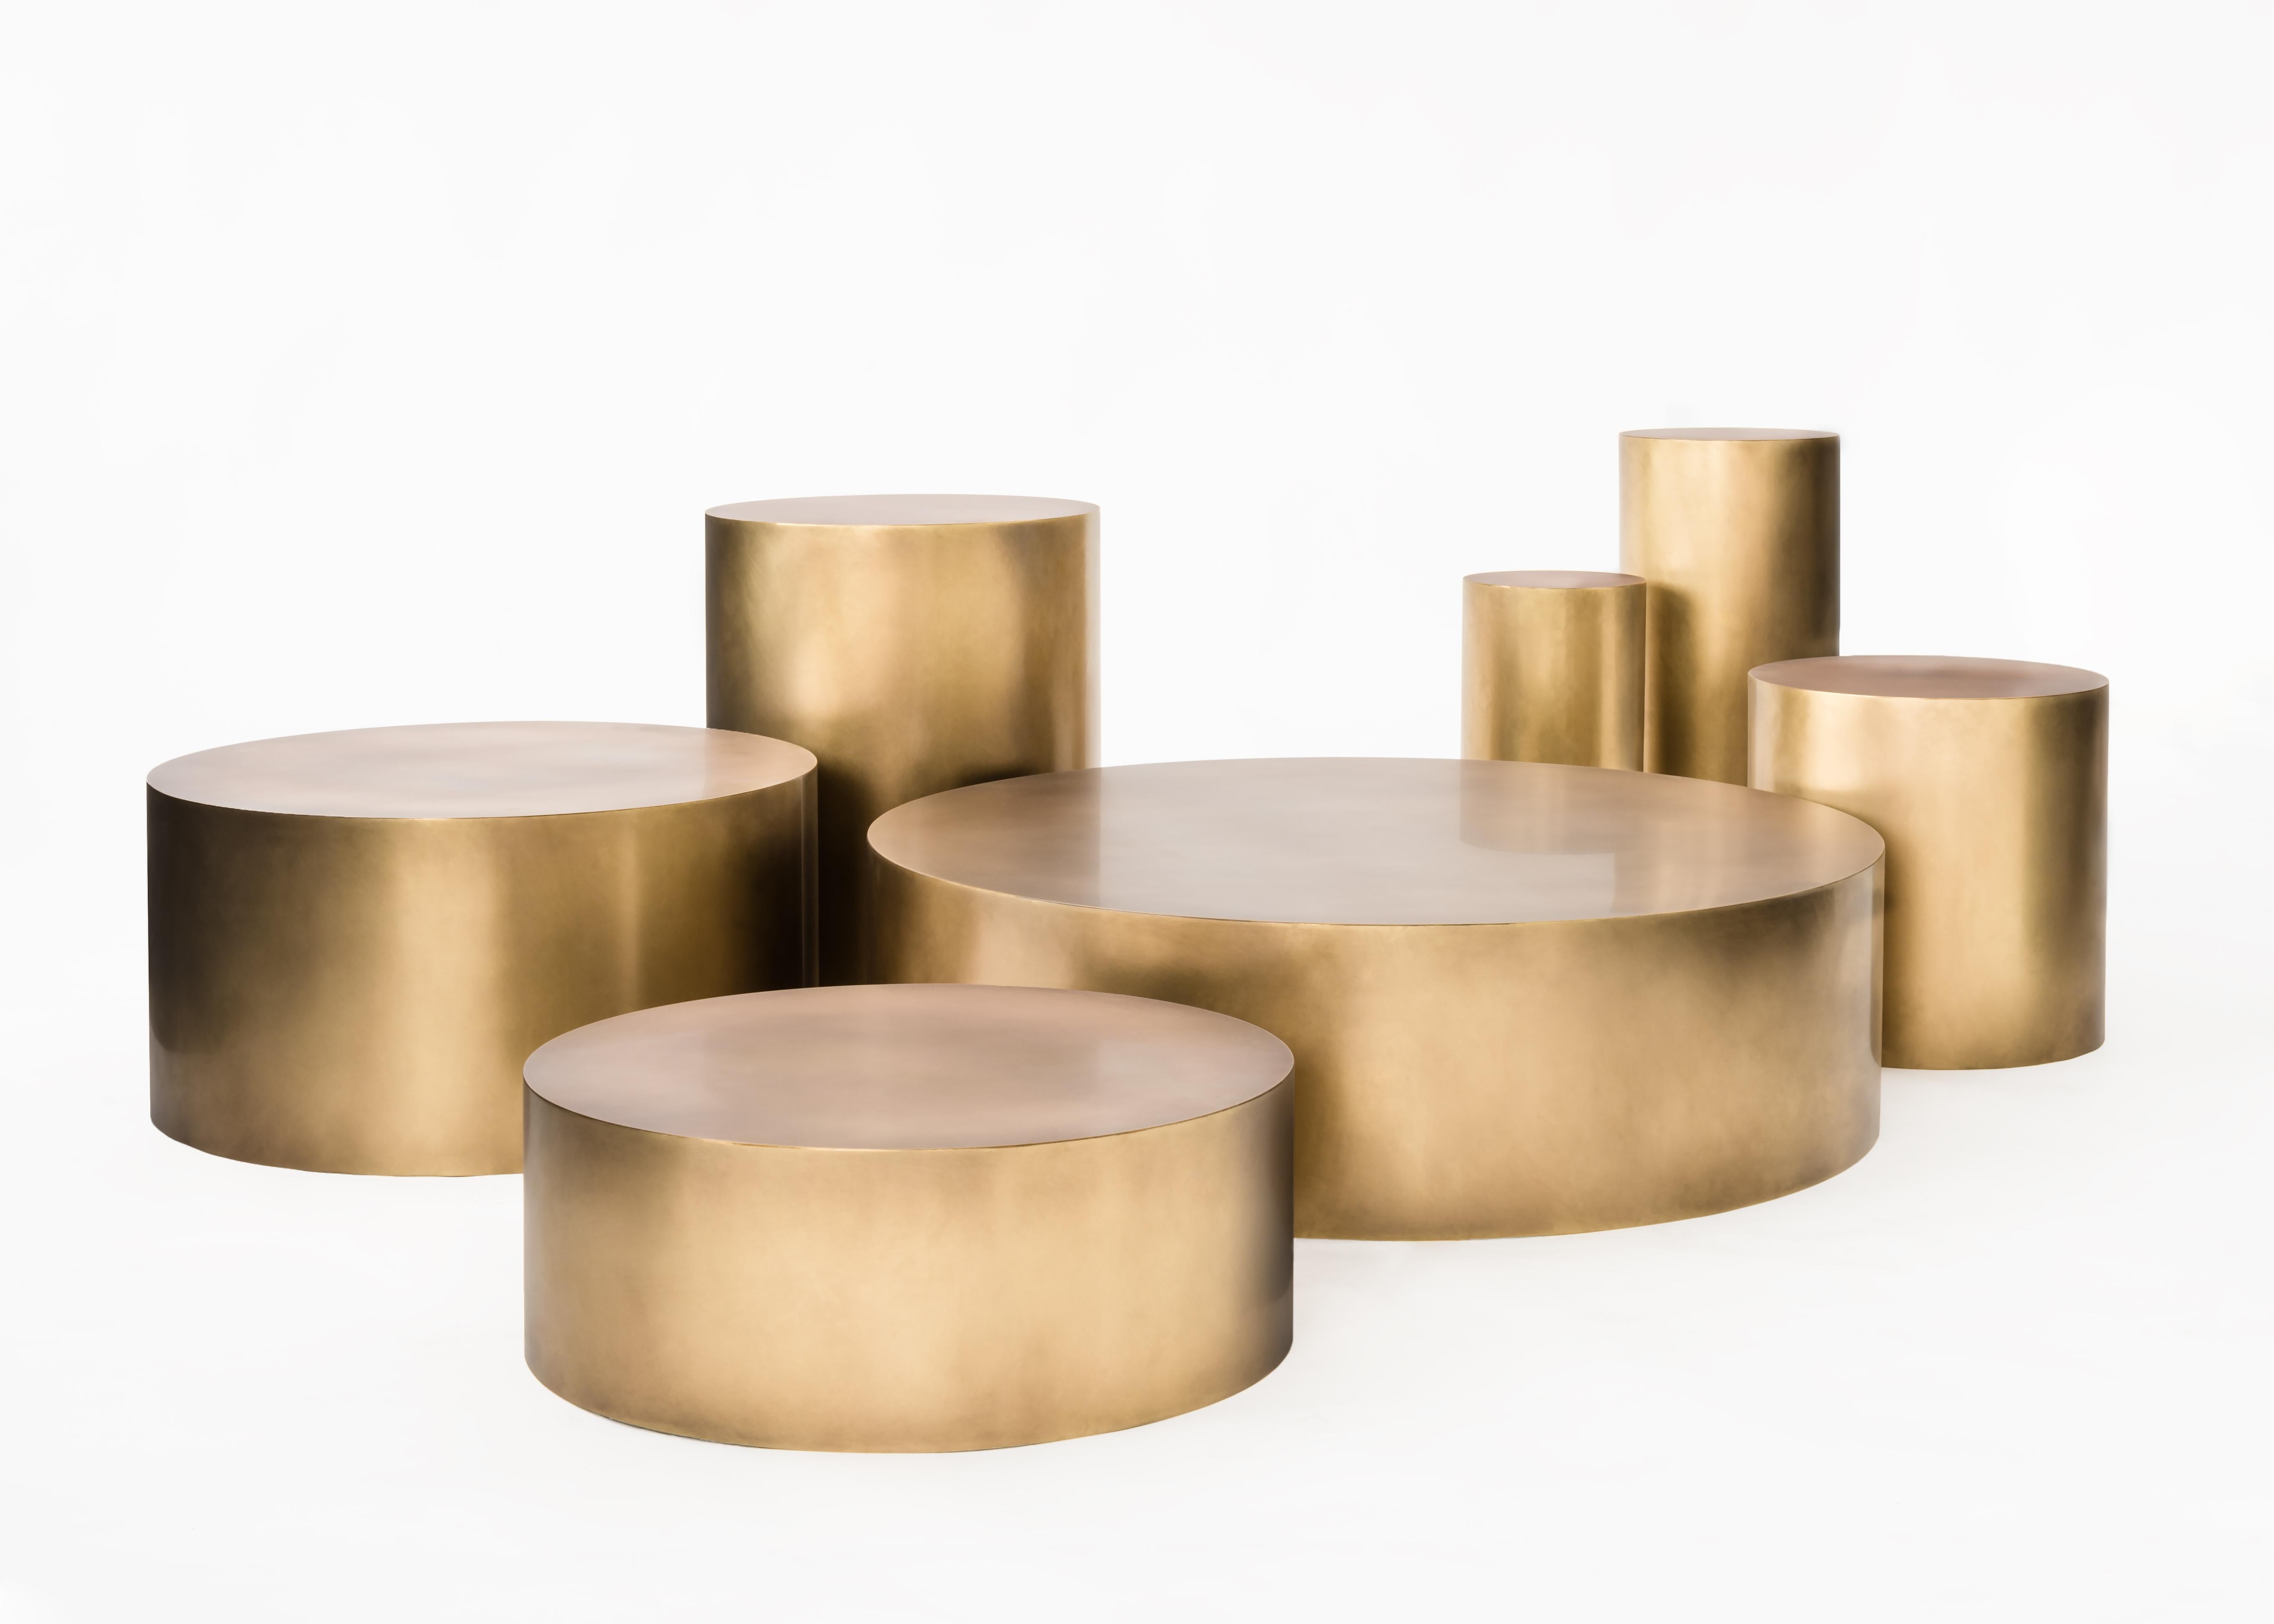 Pricing is for the set of 7 as shown but each table can be sold individually.

Mushroom City mixes ‘70s glamour with contemporary simplicity to create a table system with high style in limitless variations. A creative alternative to the